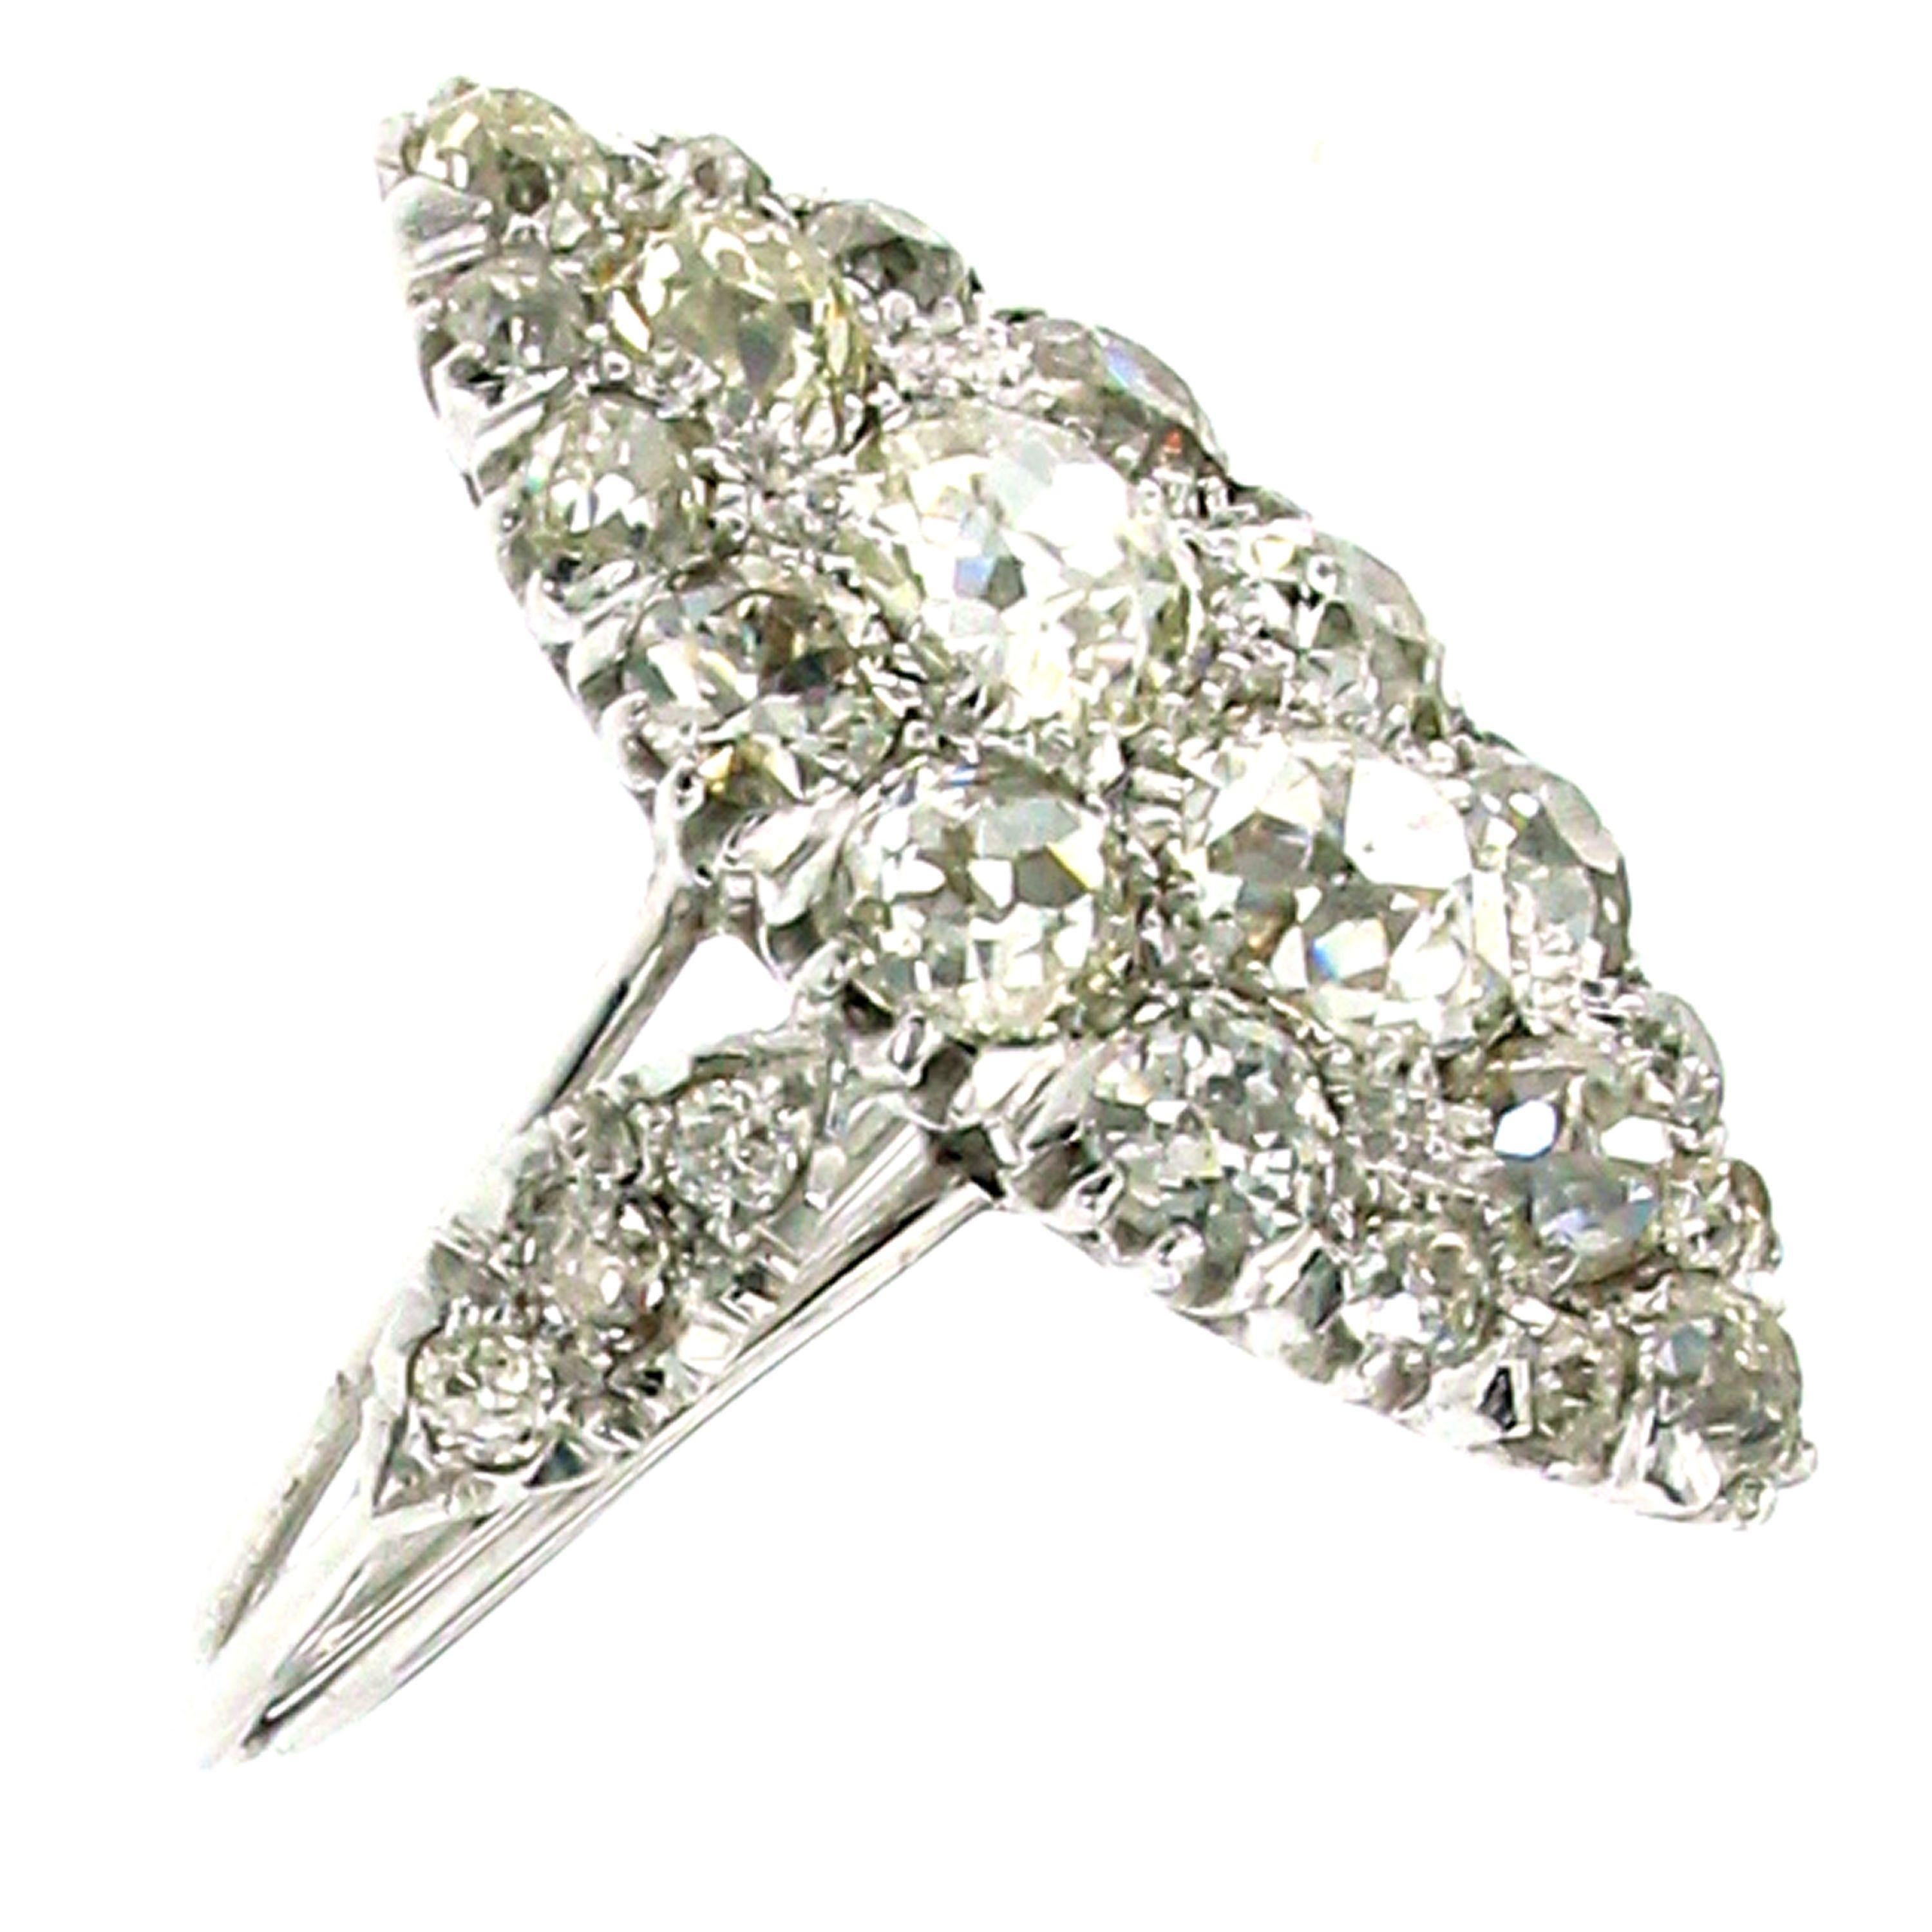 An Antique Art Deco Platinum Diamond Ring featuring 26 Old mine cut Diamonds for a total weight of 5 carats, graded H/I color VS clarity.
Hand-crafted in Platinum during Art Deco era.

CONDITION: Pre-Owned - Excellent
METAL: Platinum
GEM STONE: